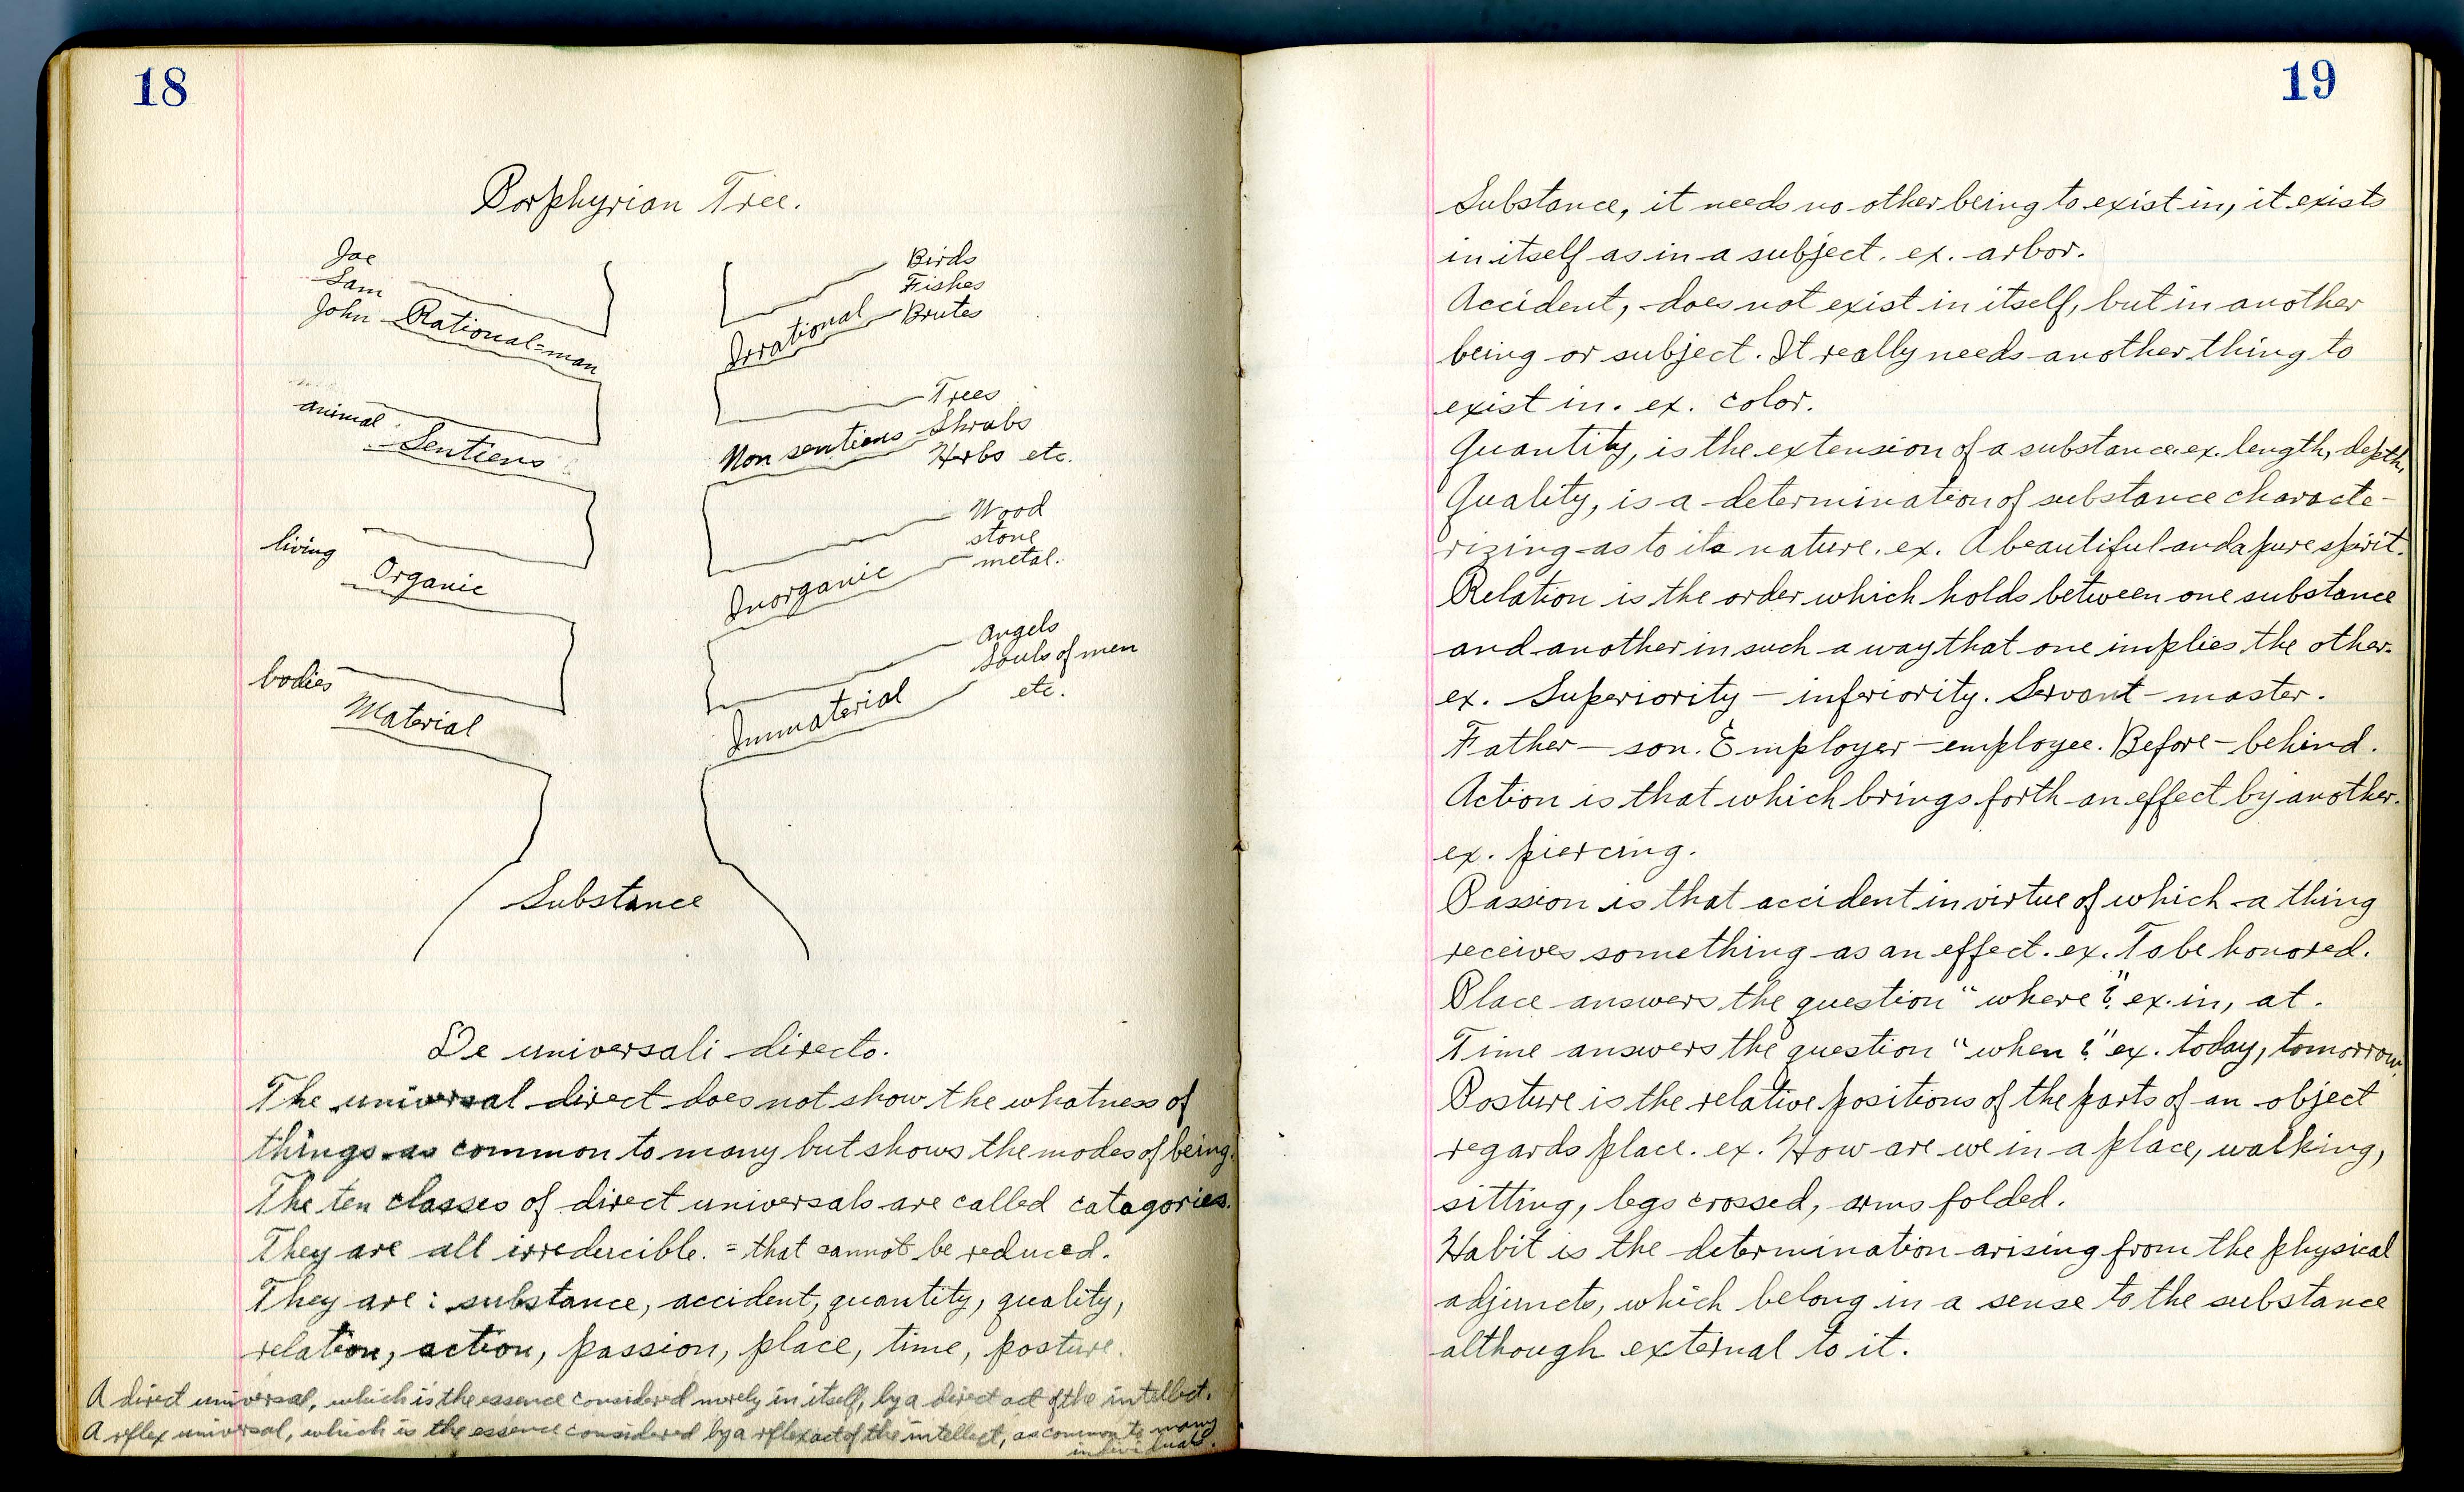 New Acquisition: The Journals of T.C. Abbot | Archives @ MSU